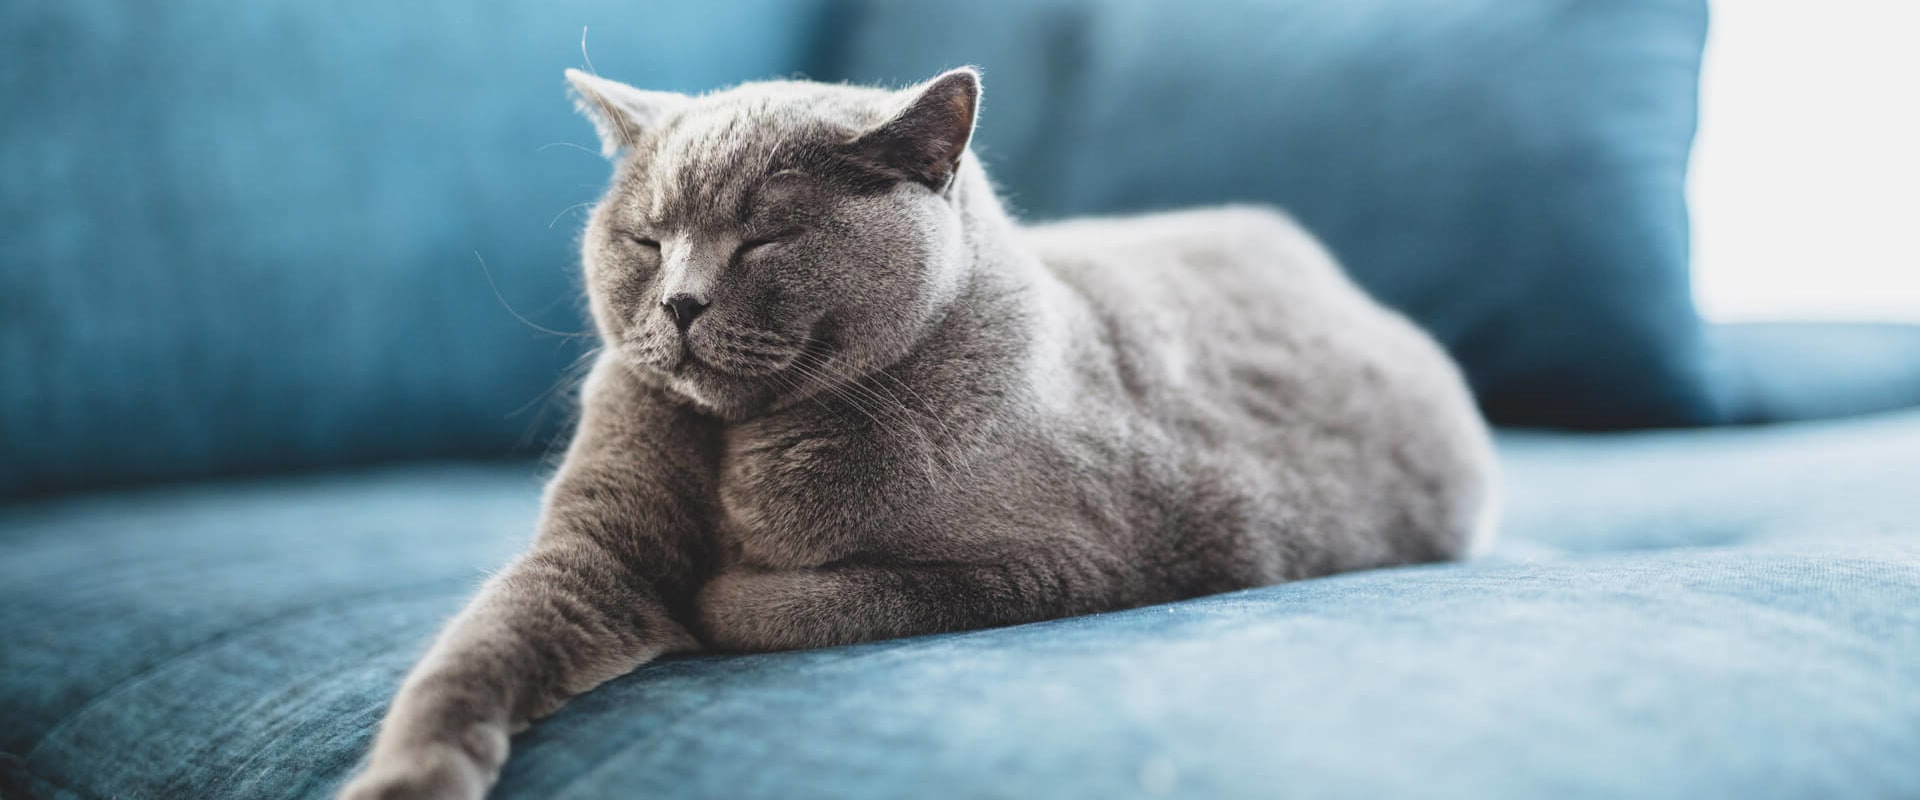 How can i tell if my cat is getting enough sleep?